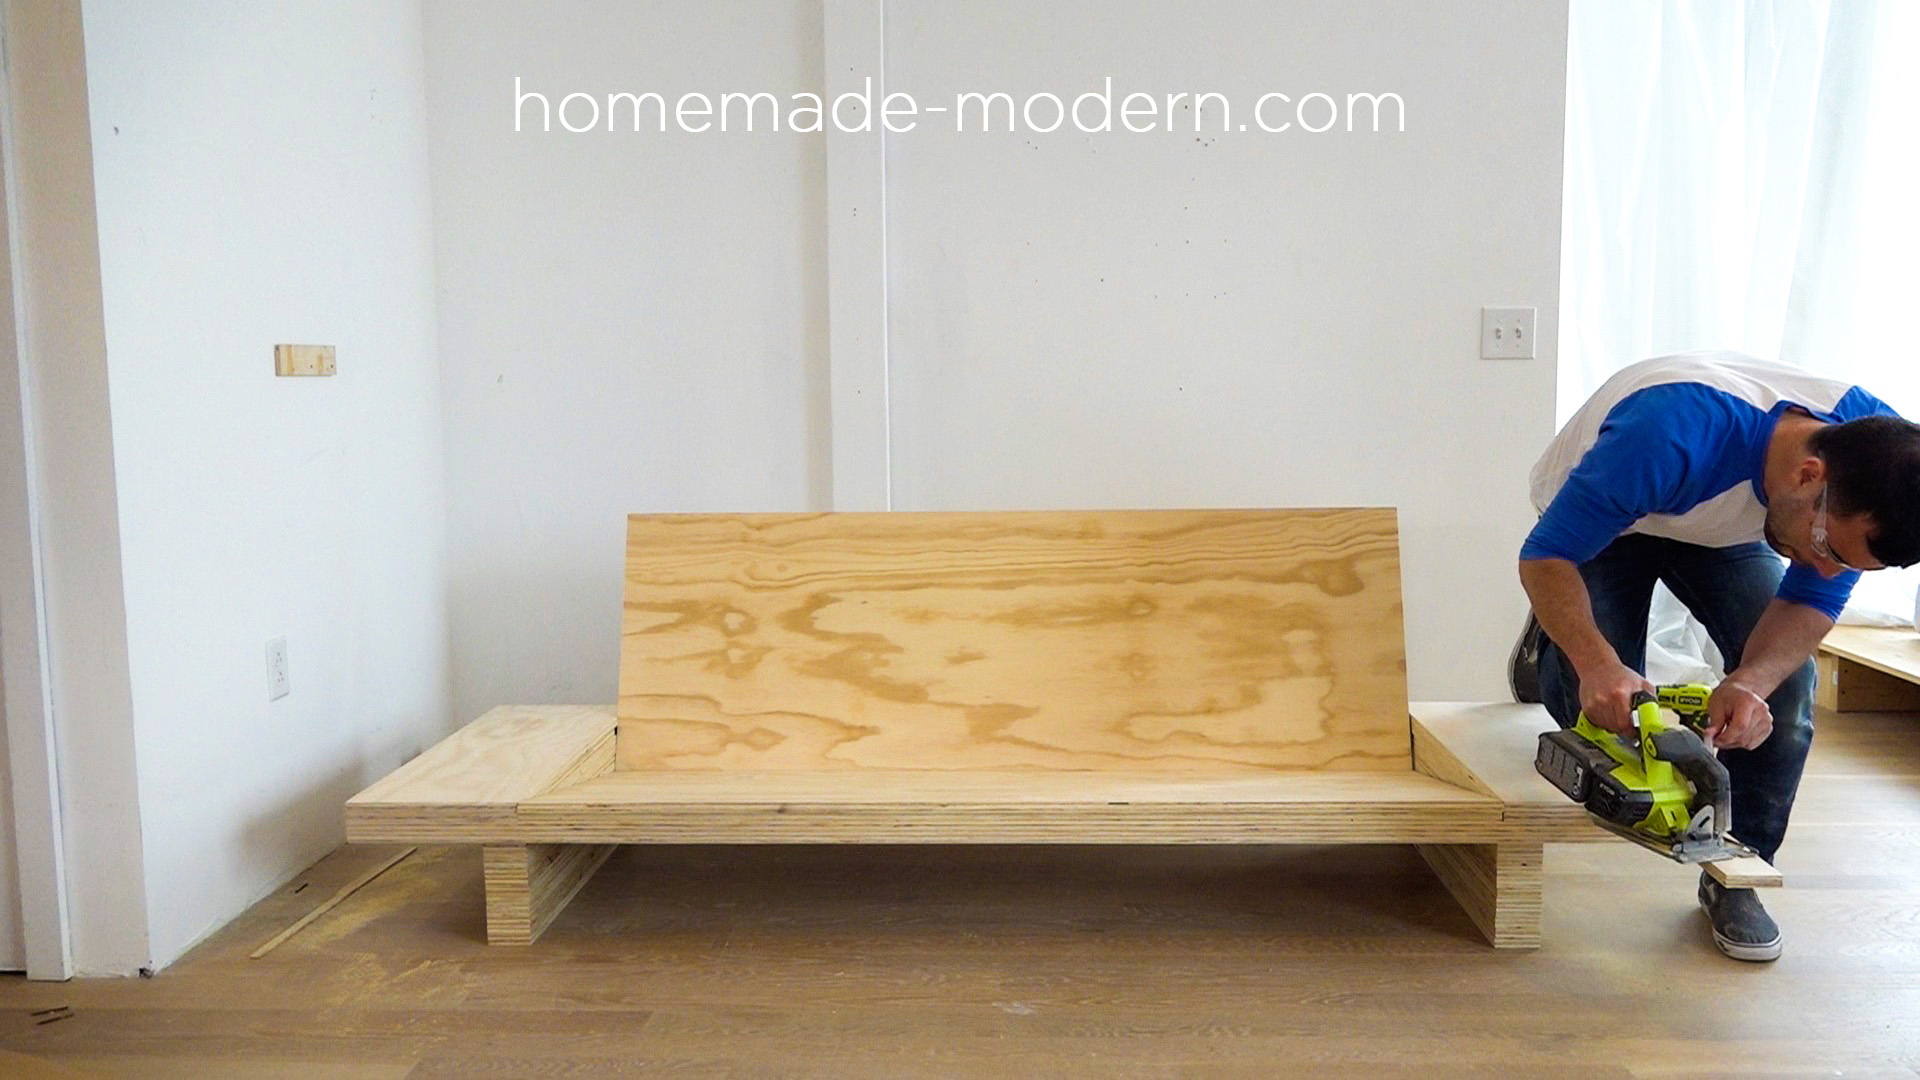 This DIY modern plywood sofa is made out of 2-1/2” sheets of ¾” plywood from Home Depot. Full instructions can be found at HomeMade-Modern.com